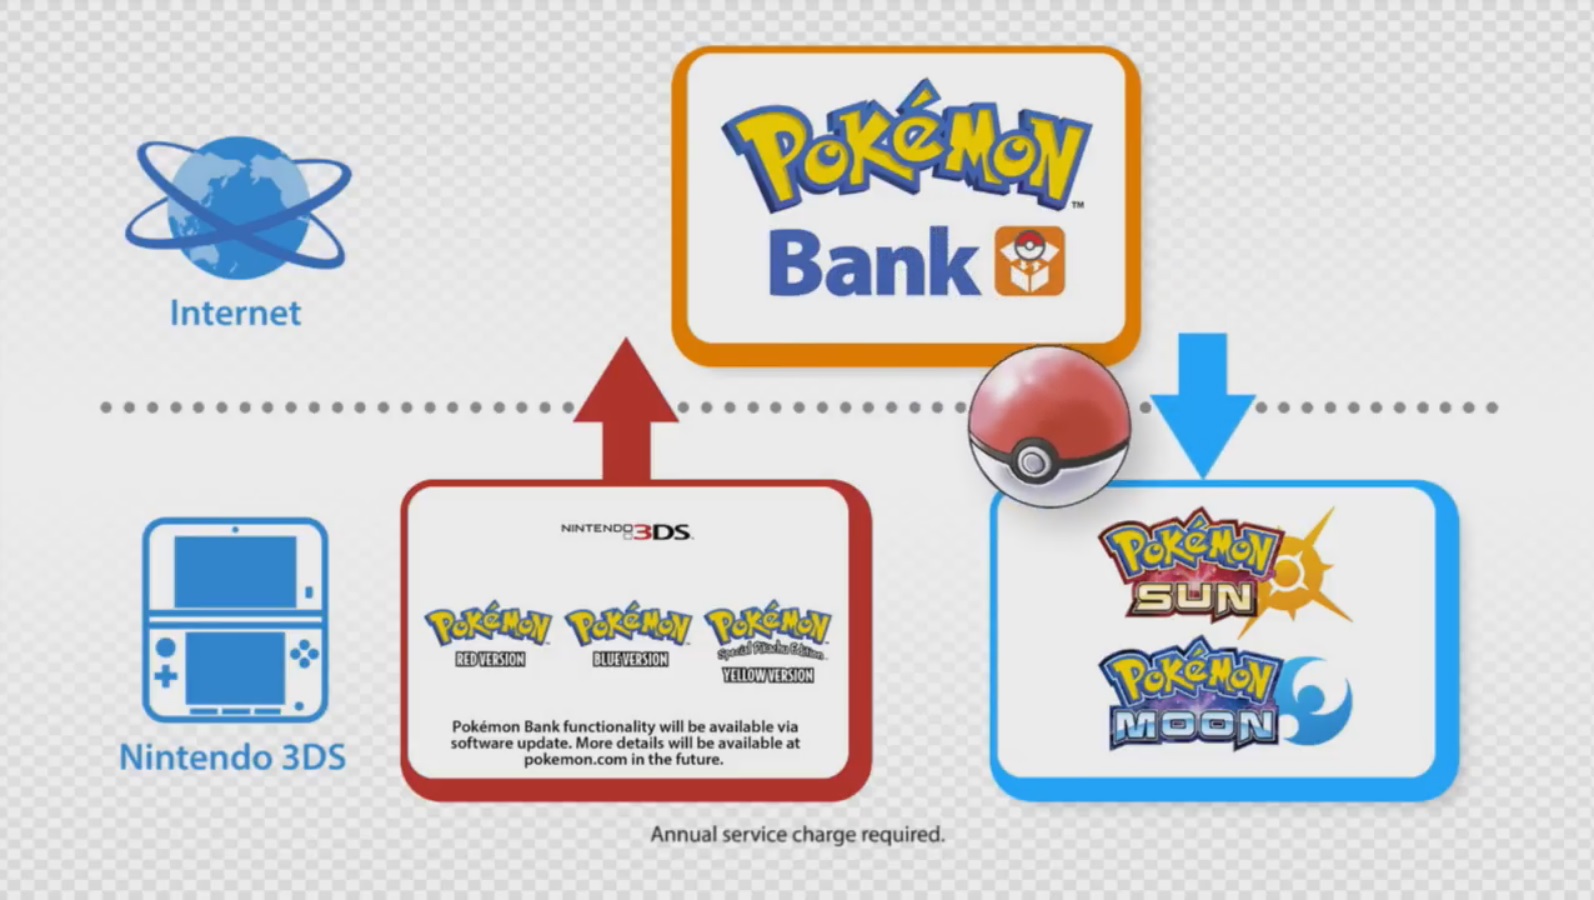 Classic Pokemon Red, Blue and Yellow coming to 3DS Virtual Console